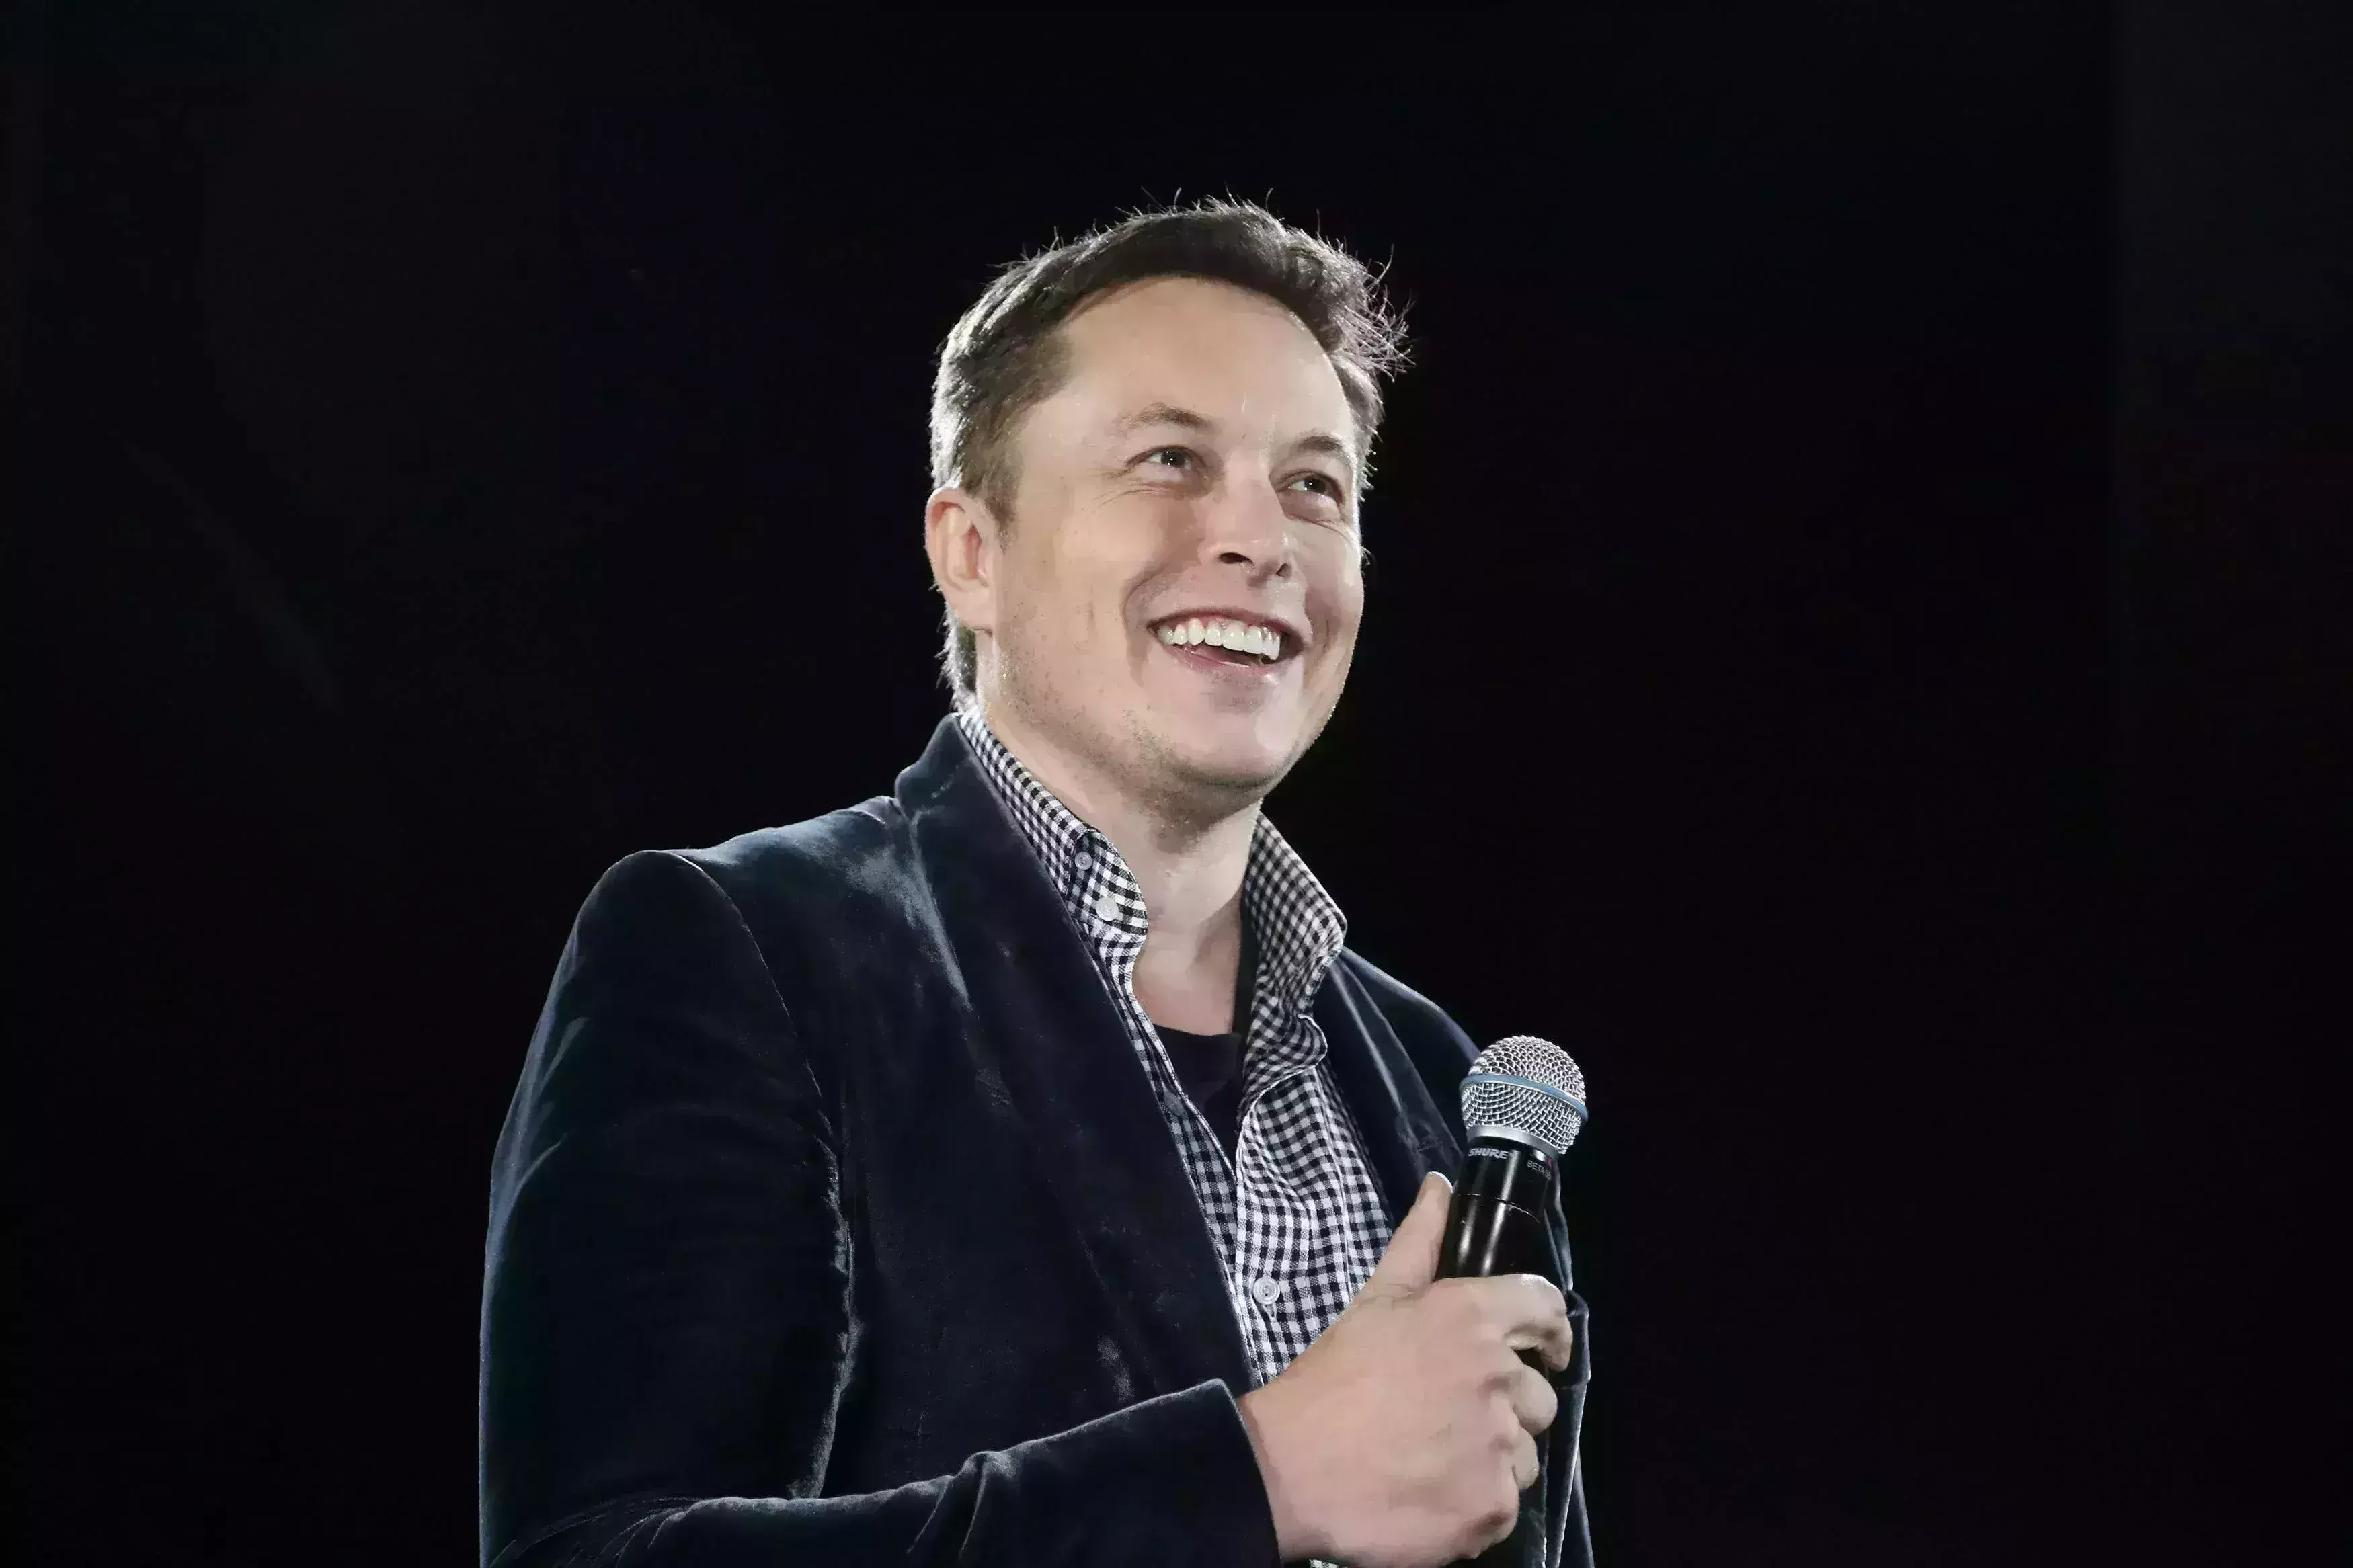 Party less and work more, says Elon Musk to Jeff Bezos